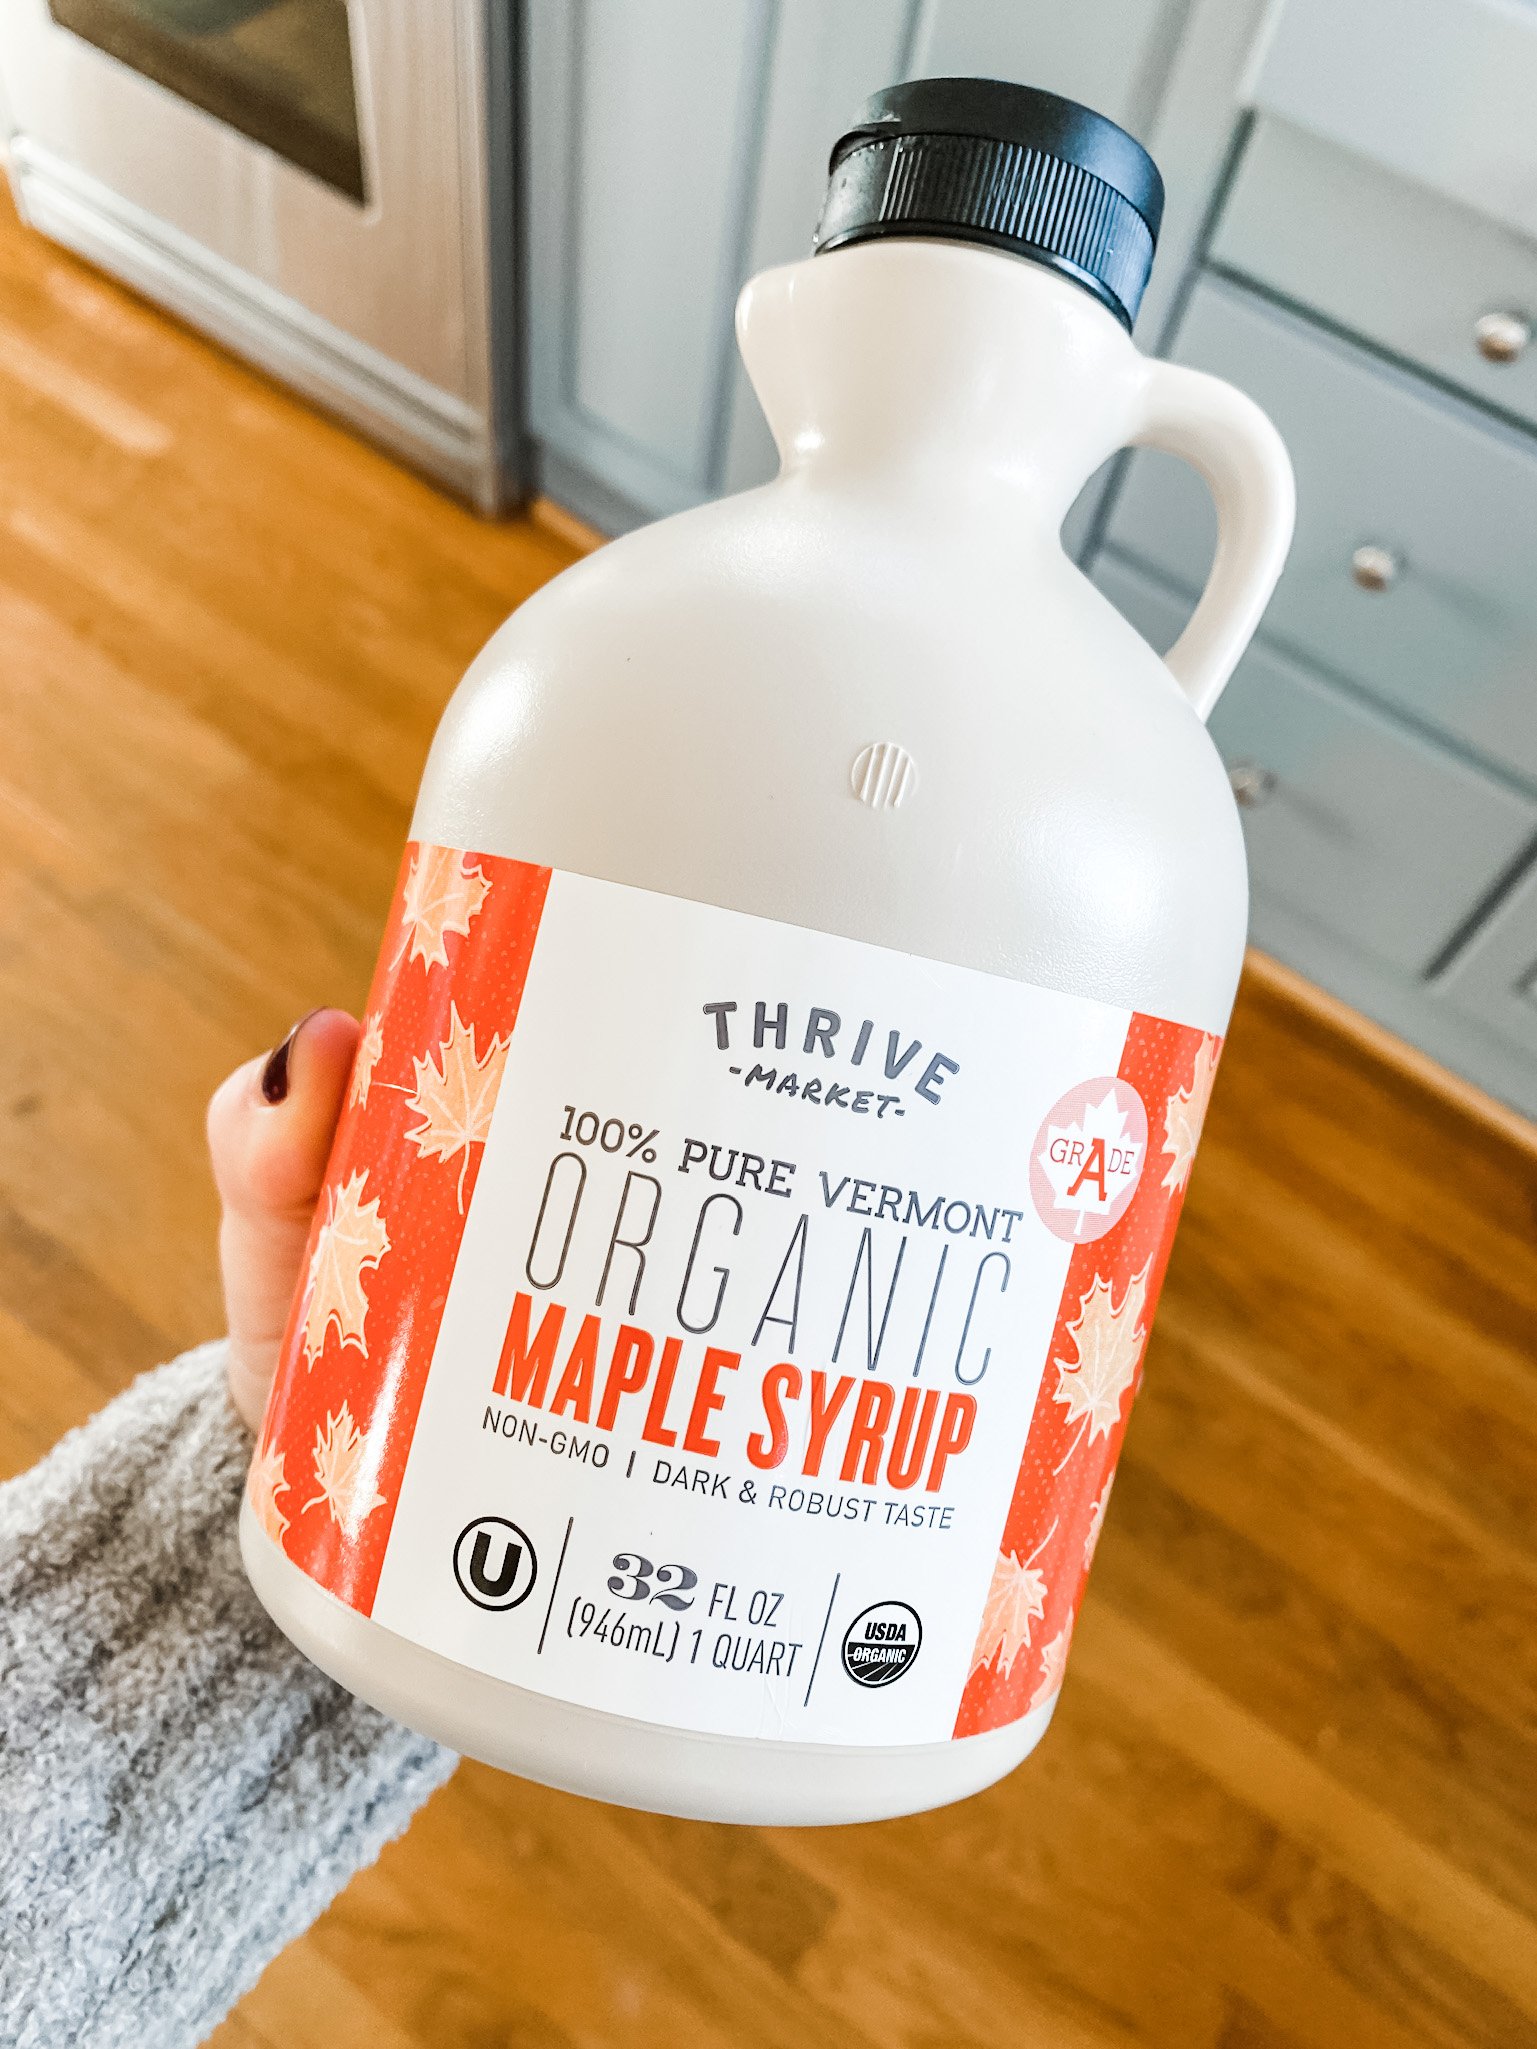 My Thrive Market Staples organic maple syrup